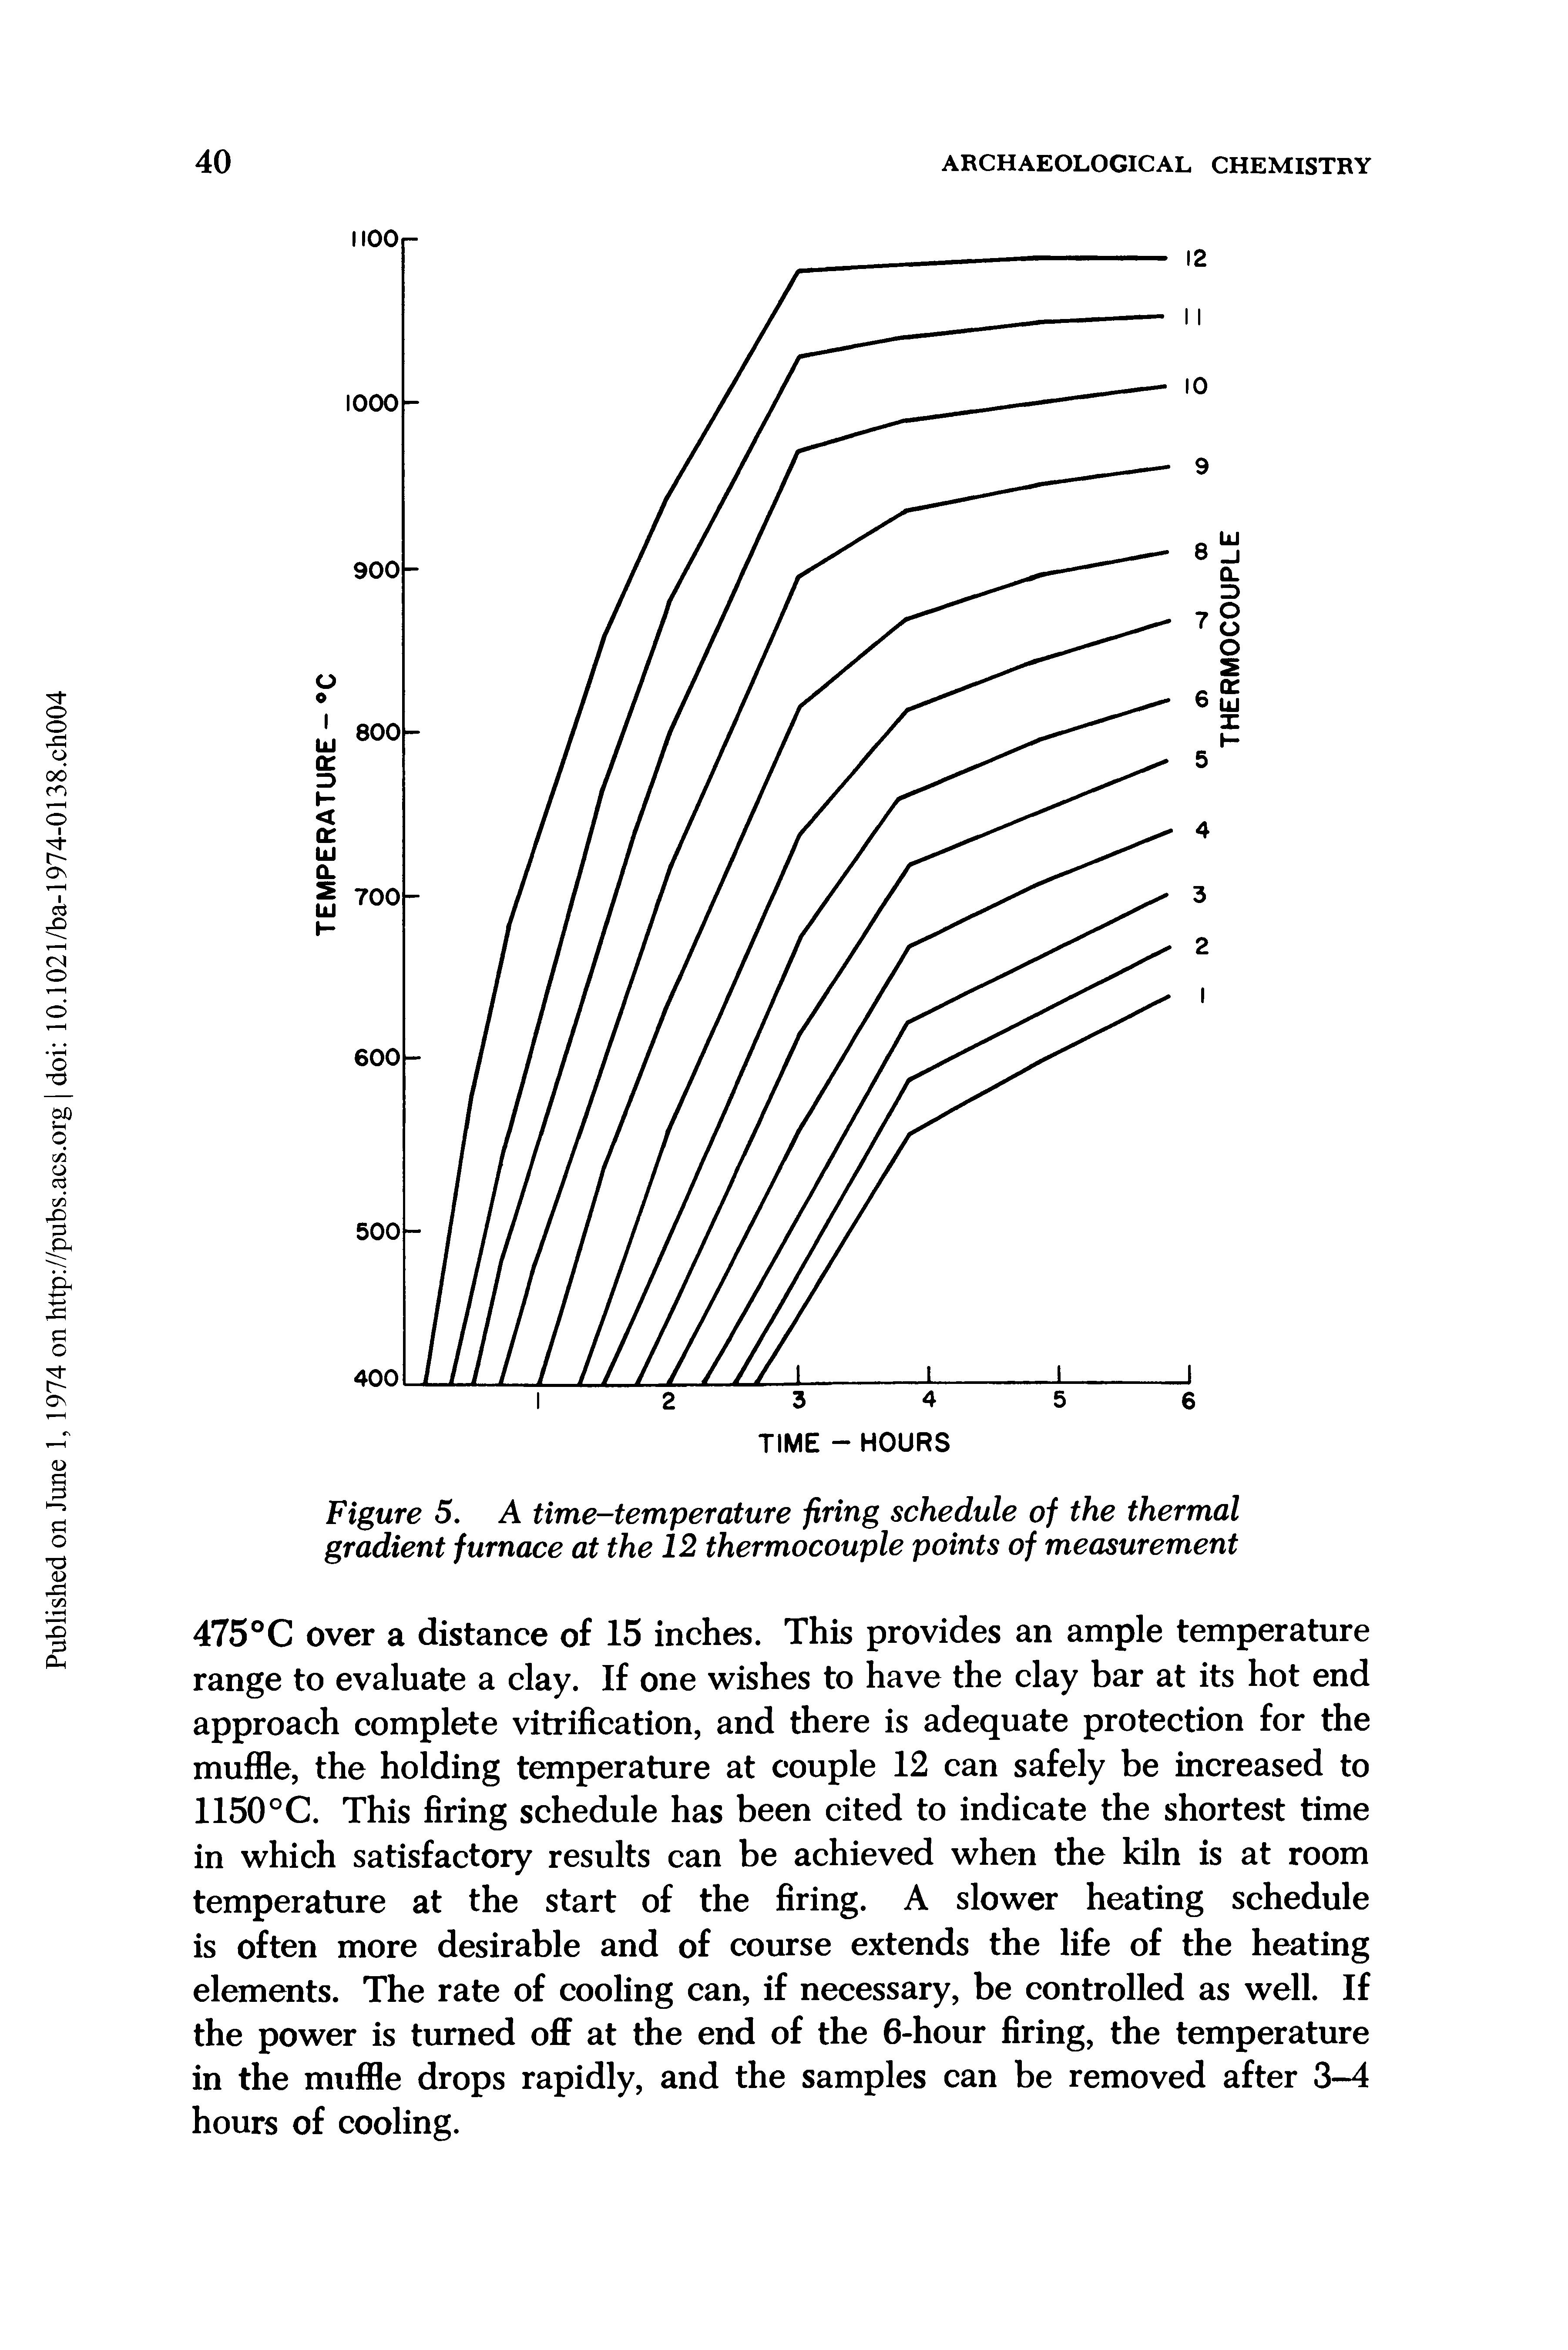 Figure 5. A time-temperature firing schedule of the thermal gradient furnace at the 12 thermocouple points of measurement...